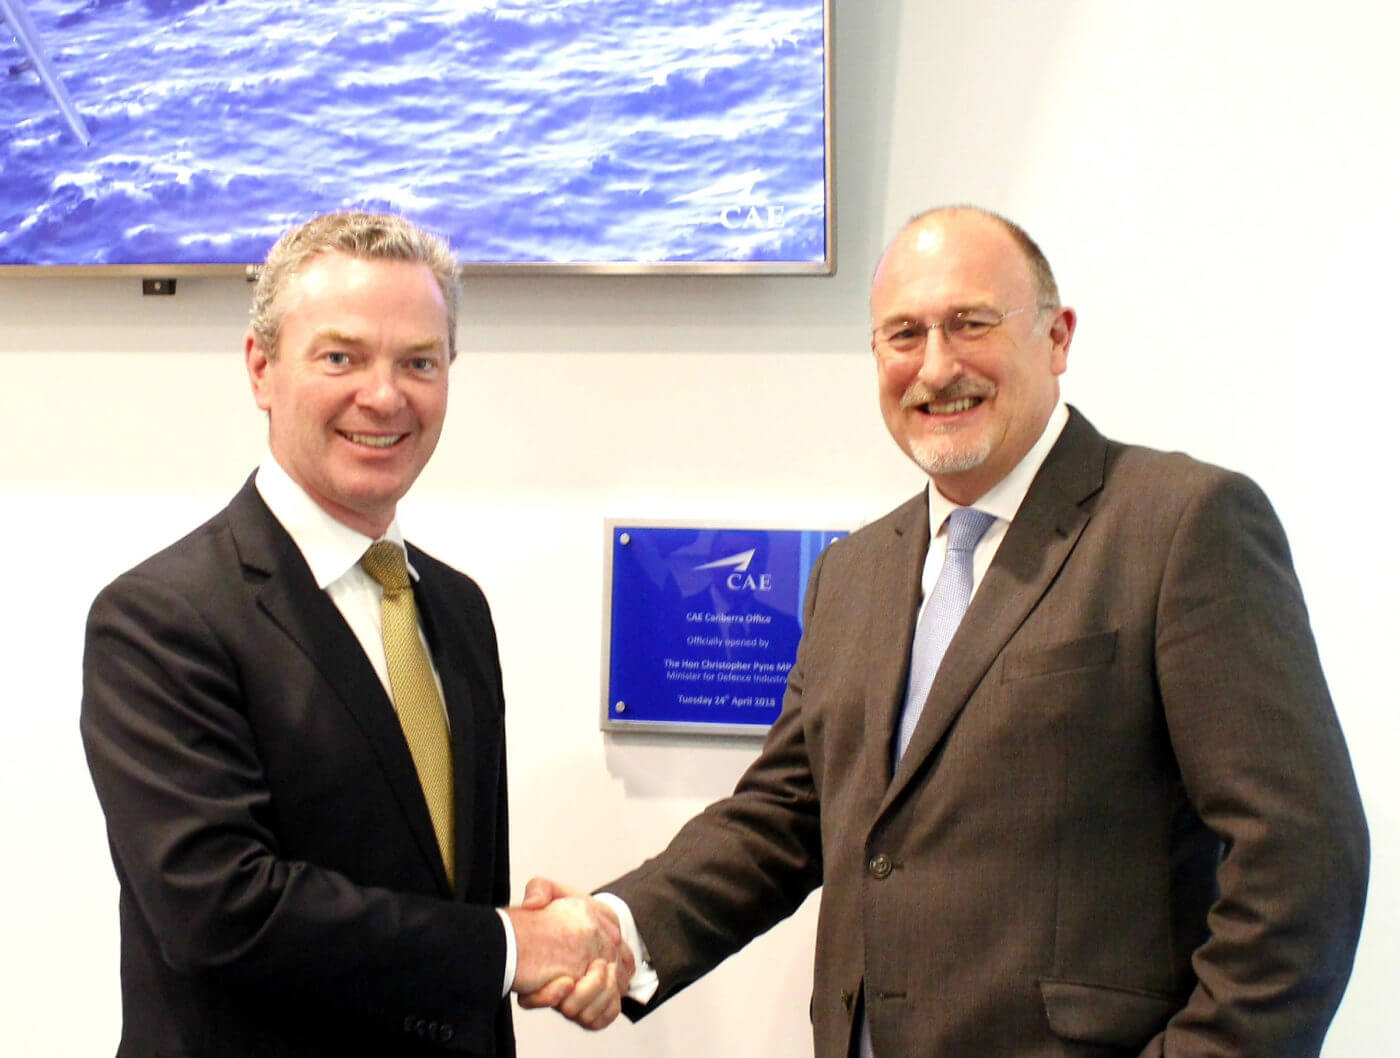 Australia's Minister for Defence Industry the Honorable Christopher Pyne (left) congratulates Ian Bell, CAE's vice president and general manager, Asia-Pacific/Middle East, on the opening of CAE's new office in Canberra. CAE Photo